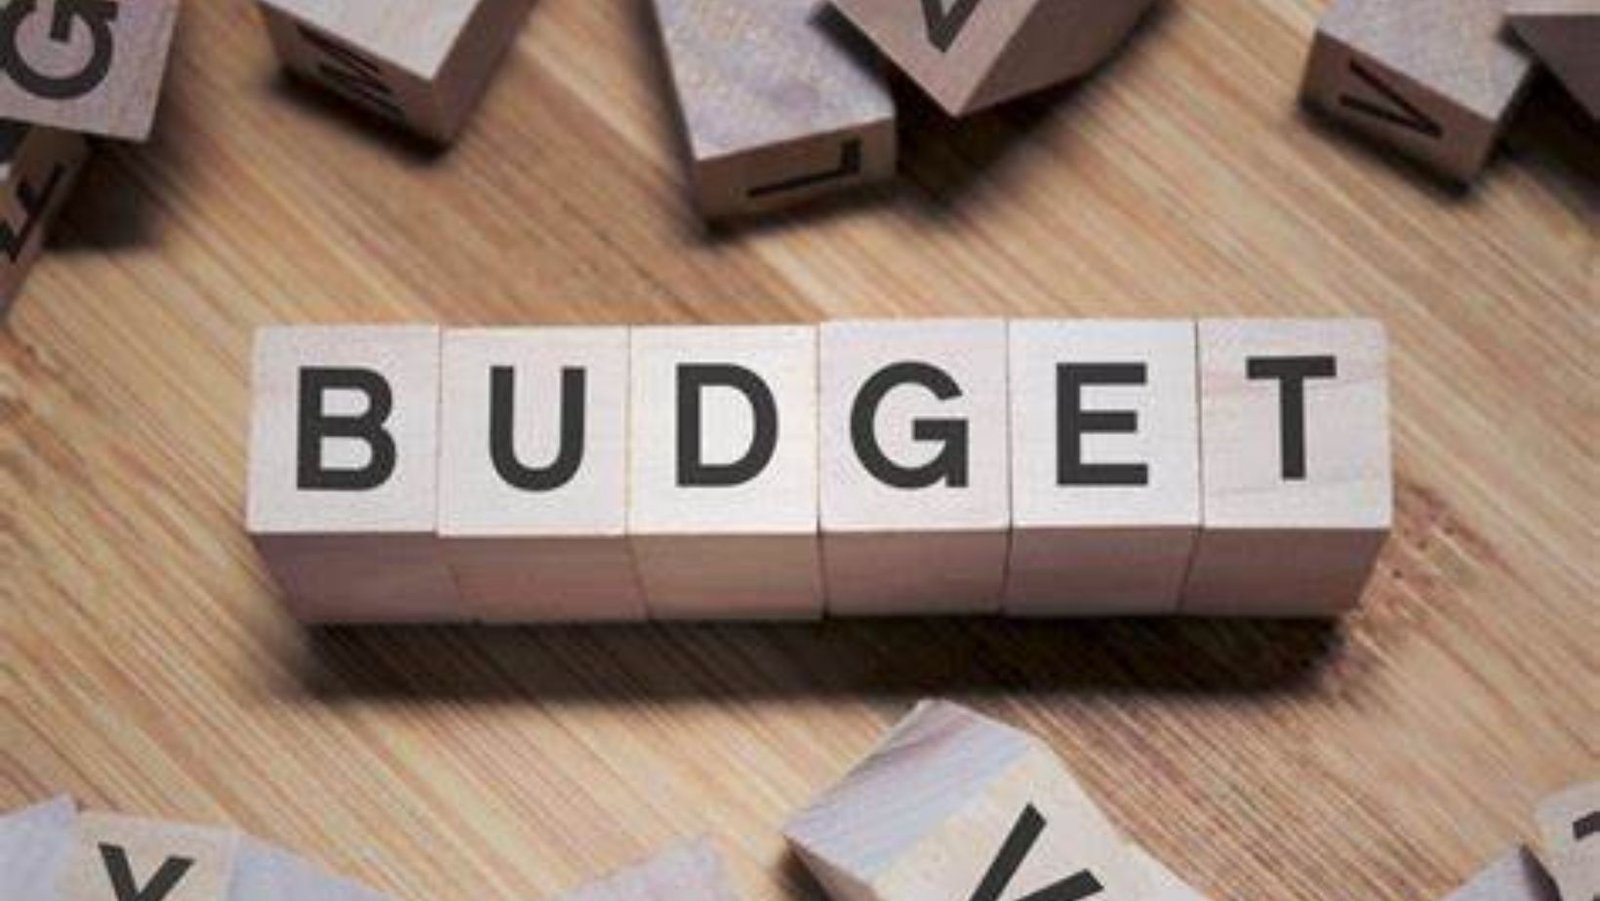 Pakistan's 2022-23 budget will be unveiled today in the hopes of restoring economic stability.